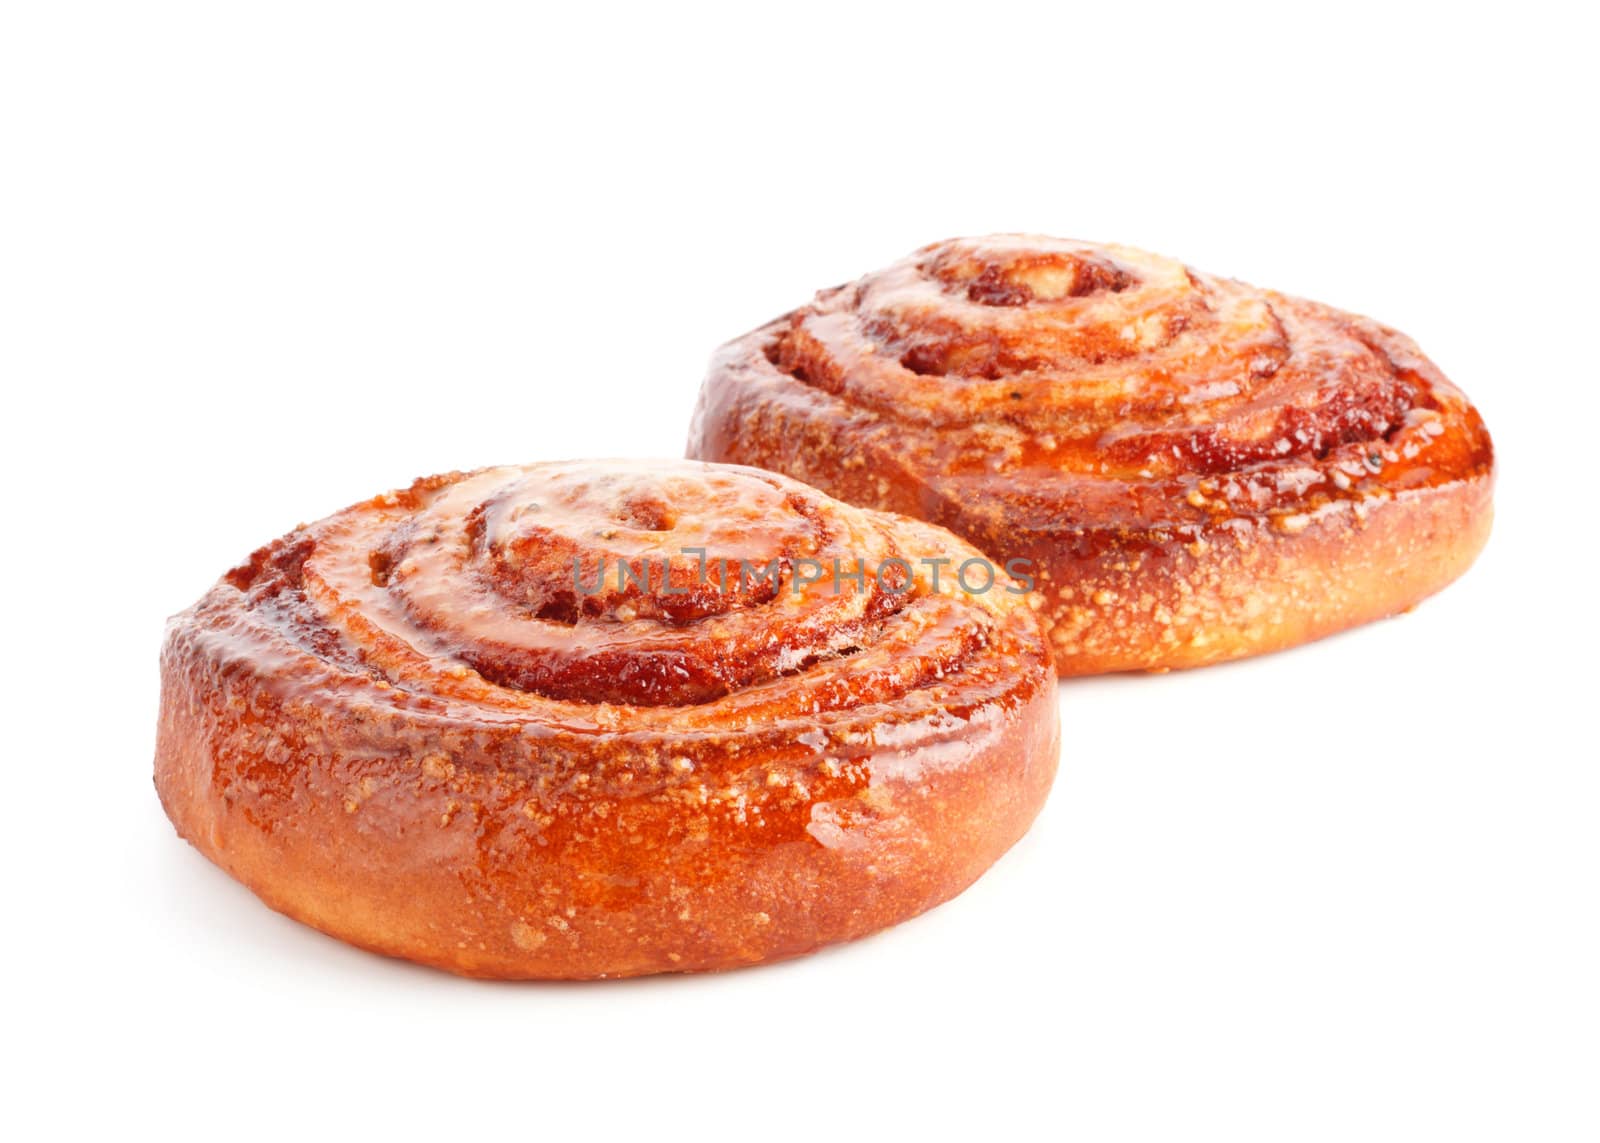  two sweet buns with cinnamon isolated on white